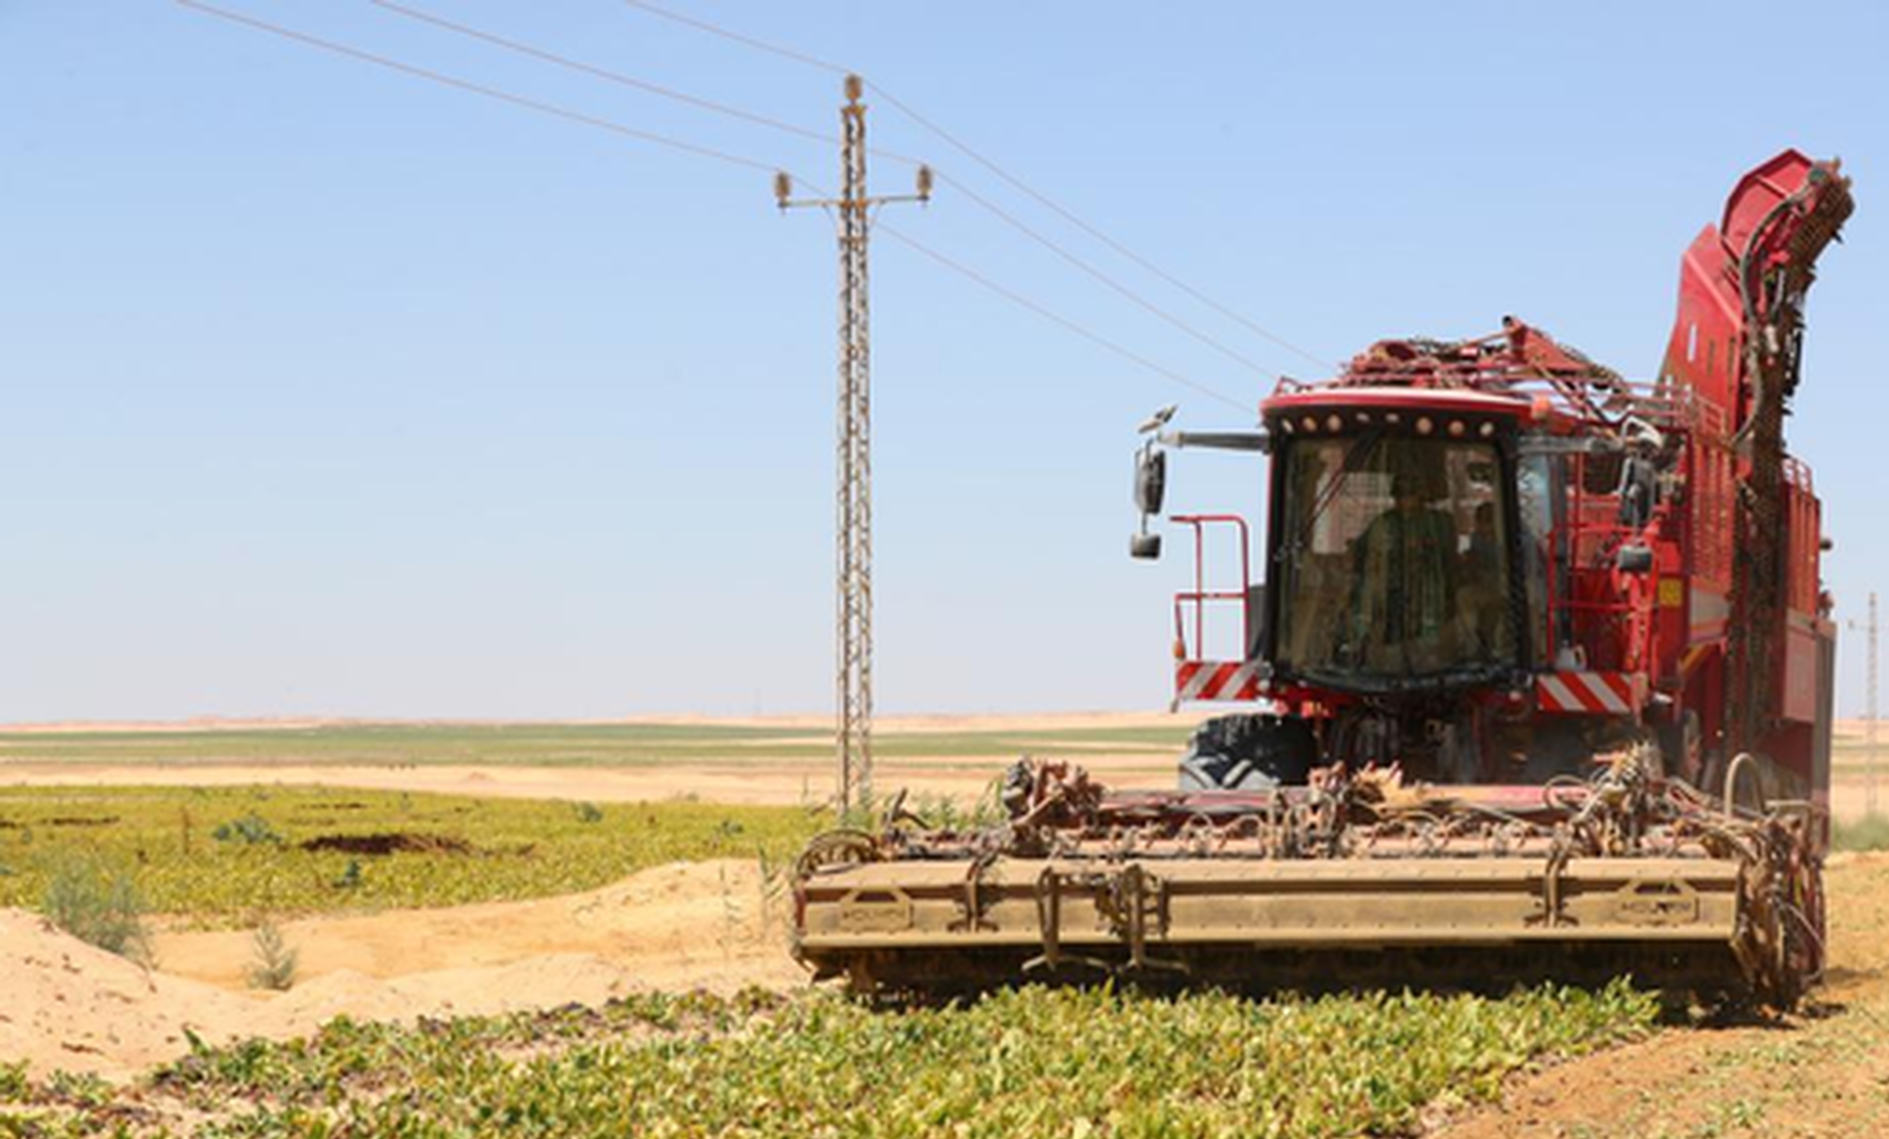 Chinese well drilling firm helps turn Egypt's desert into green farmland